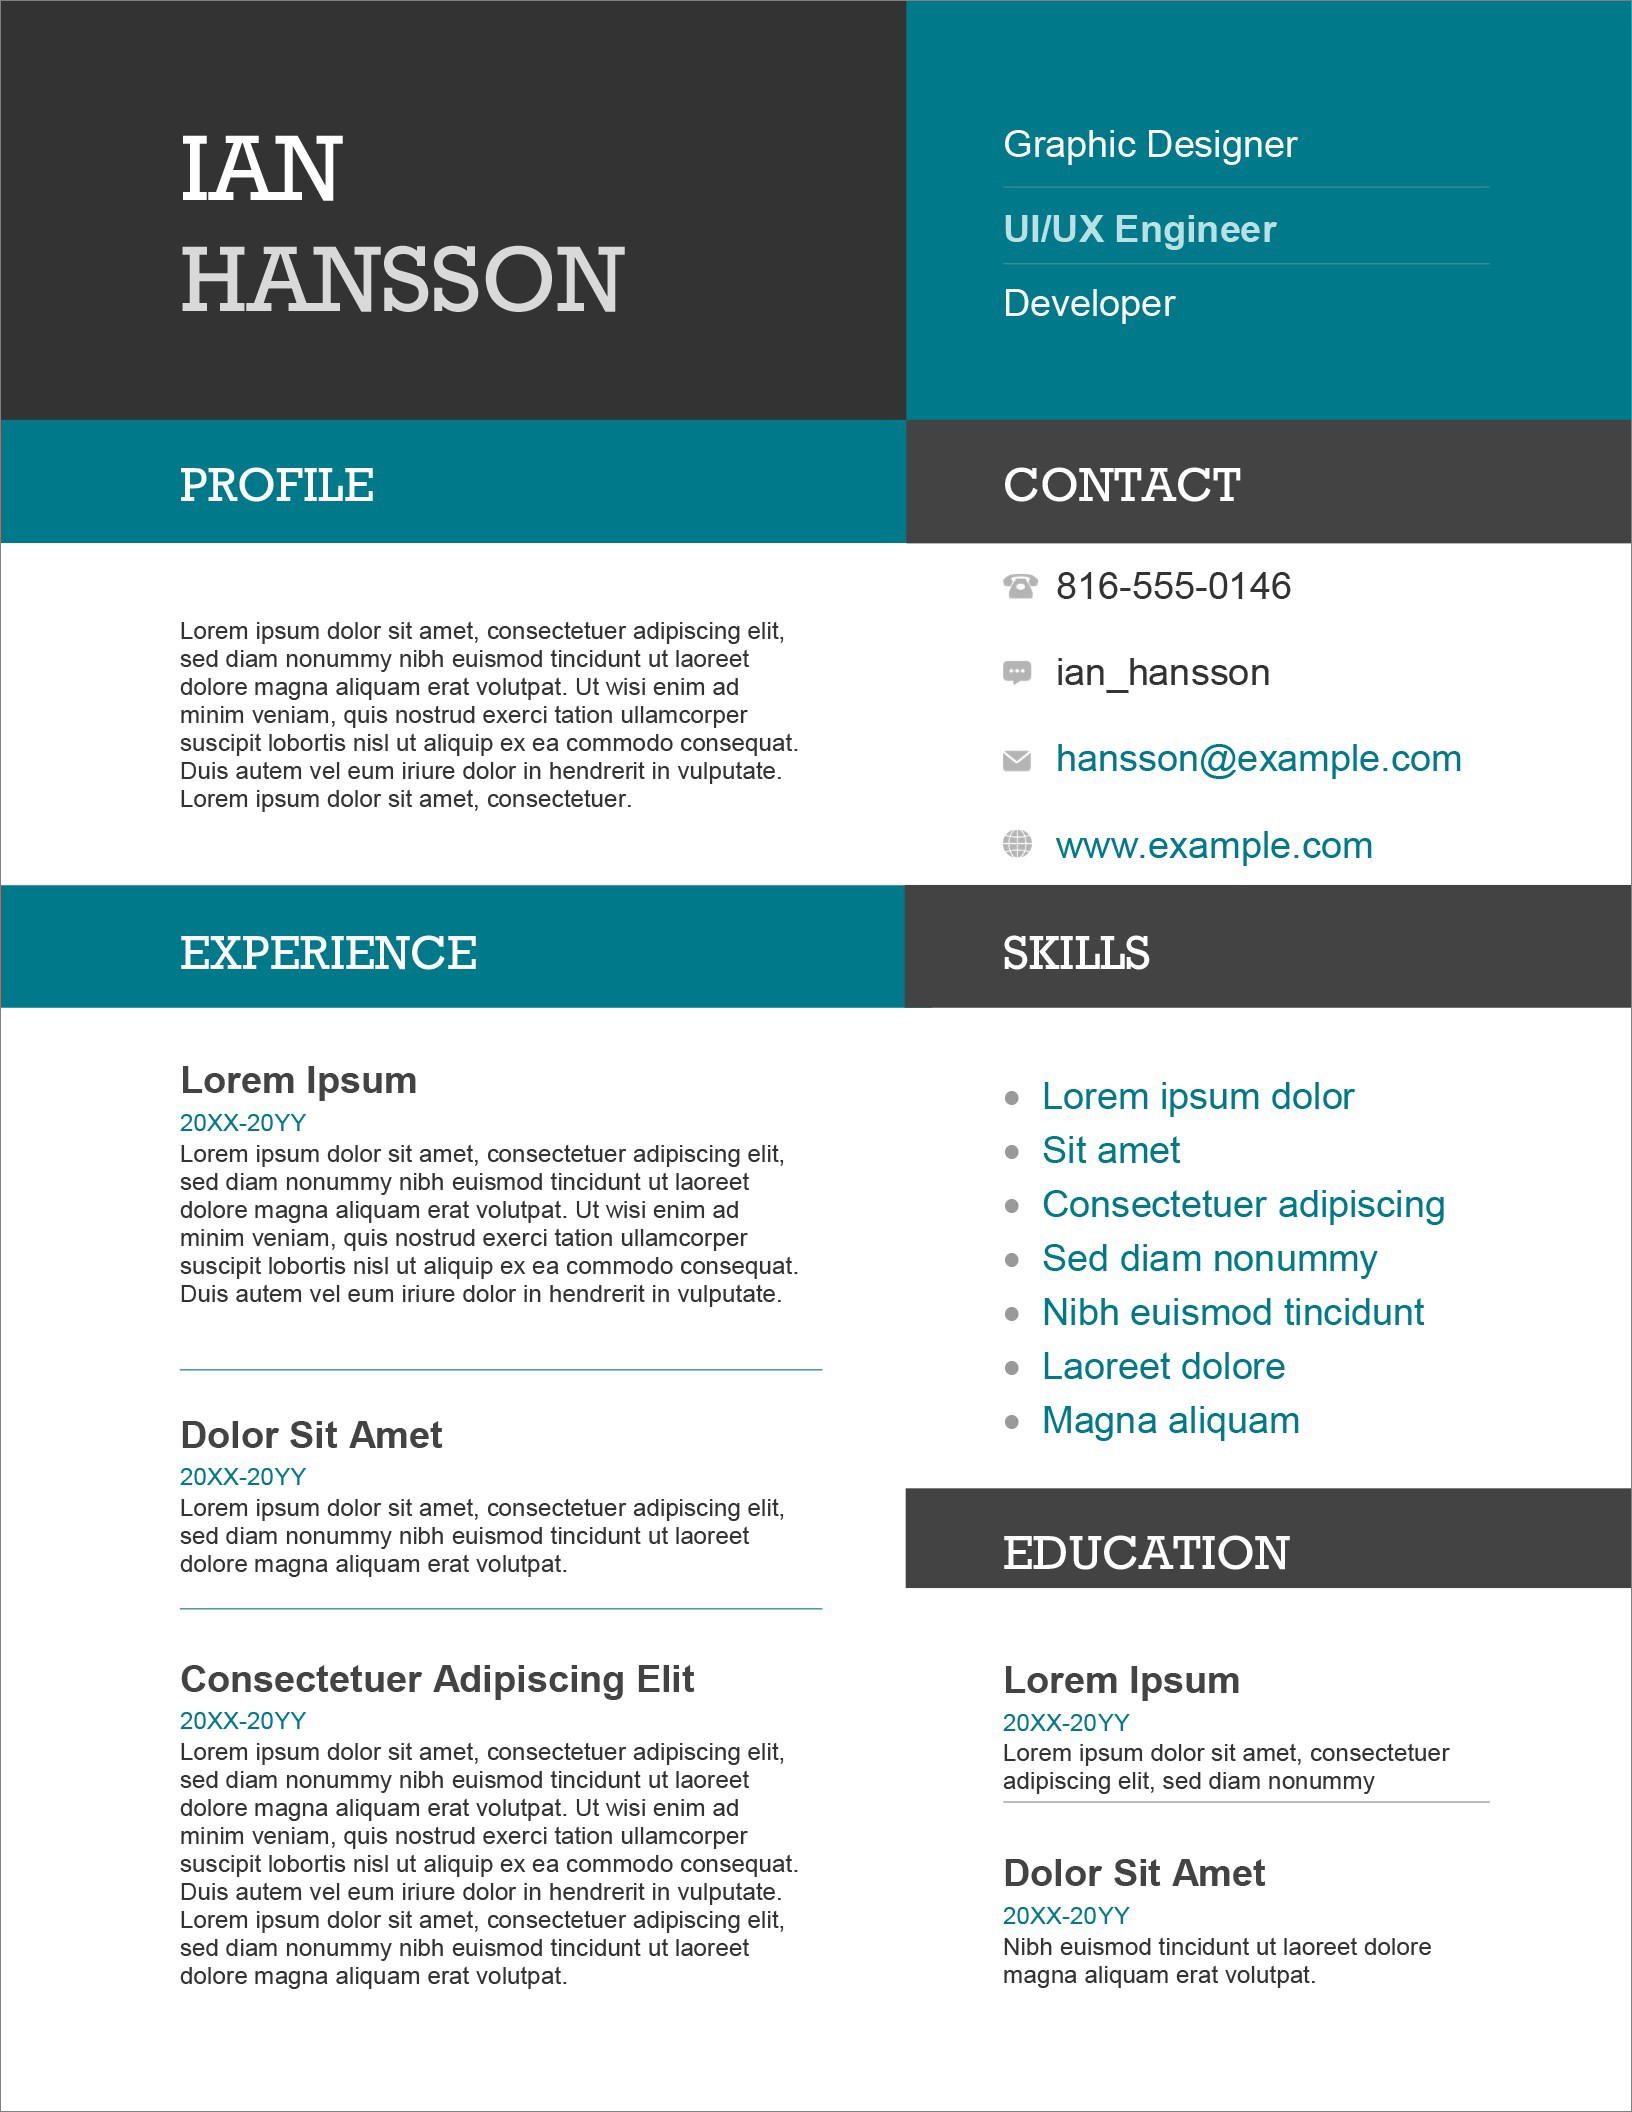 Download Resume Templates Word Free